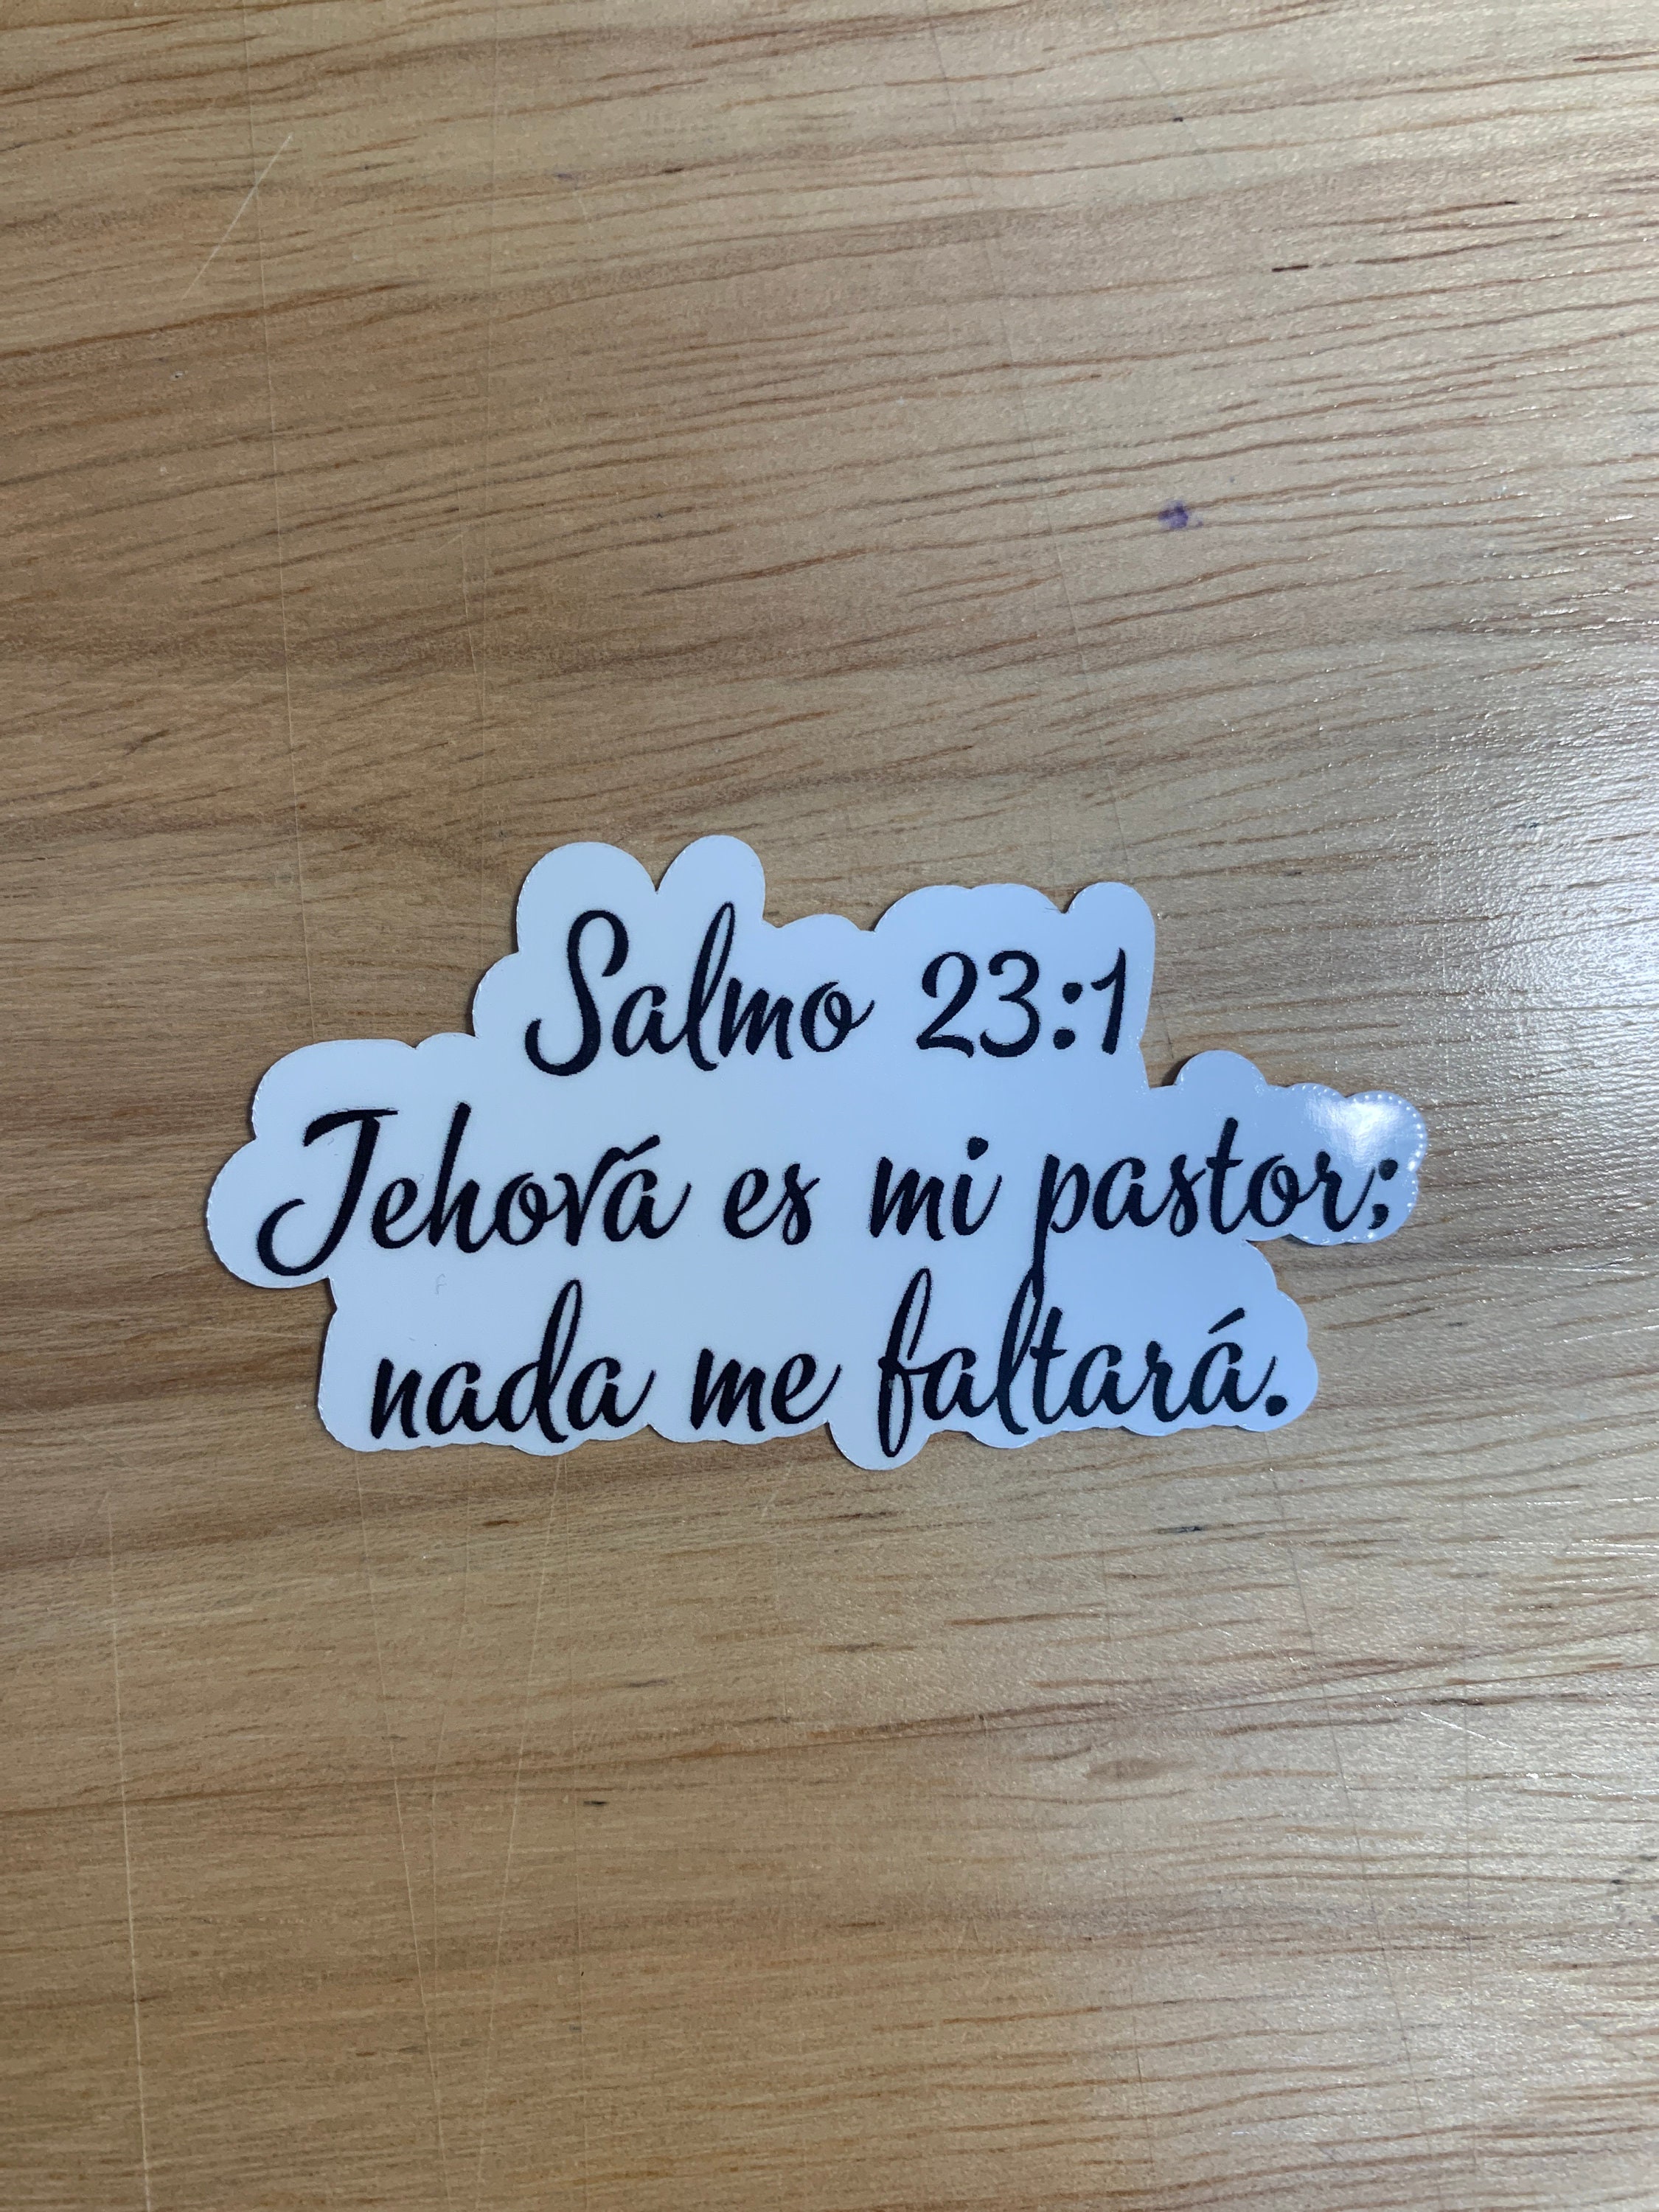 Salmo 23 Psalm 23 Spanish Necklace Stainless Steel or 18k Gold Dog Tag 24